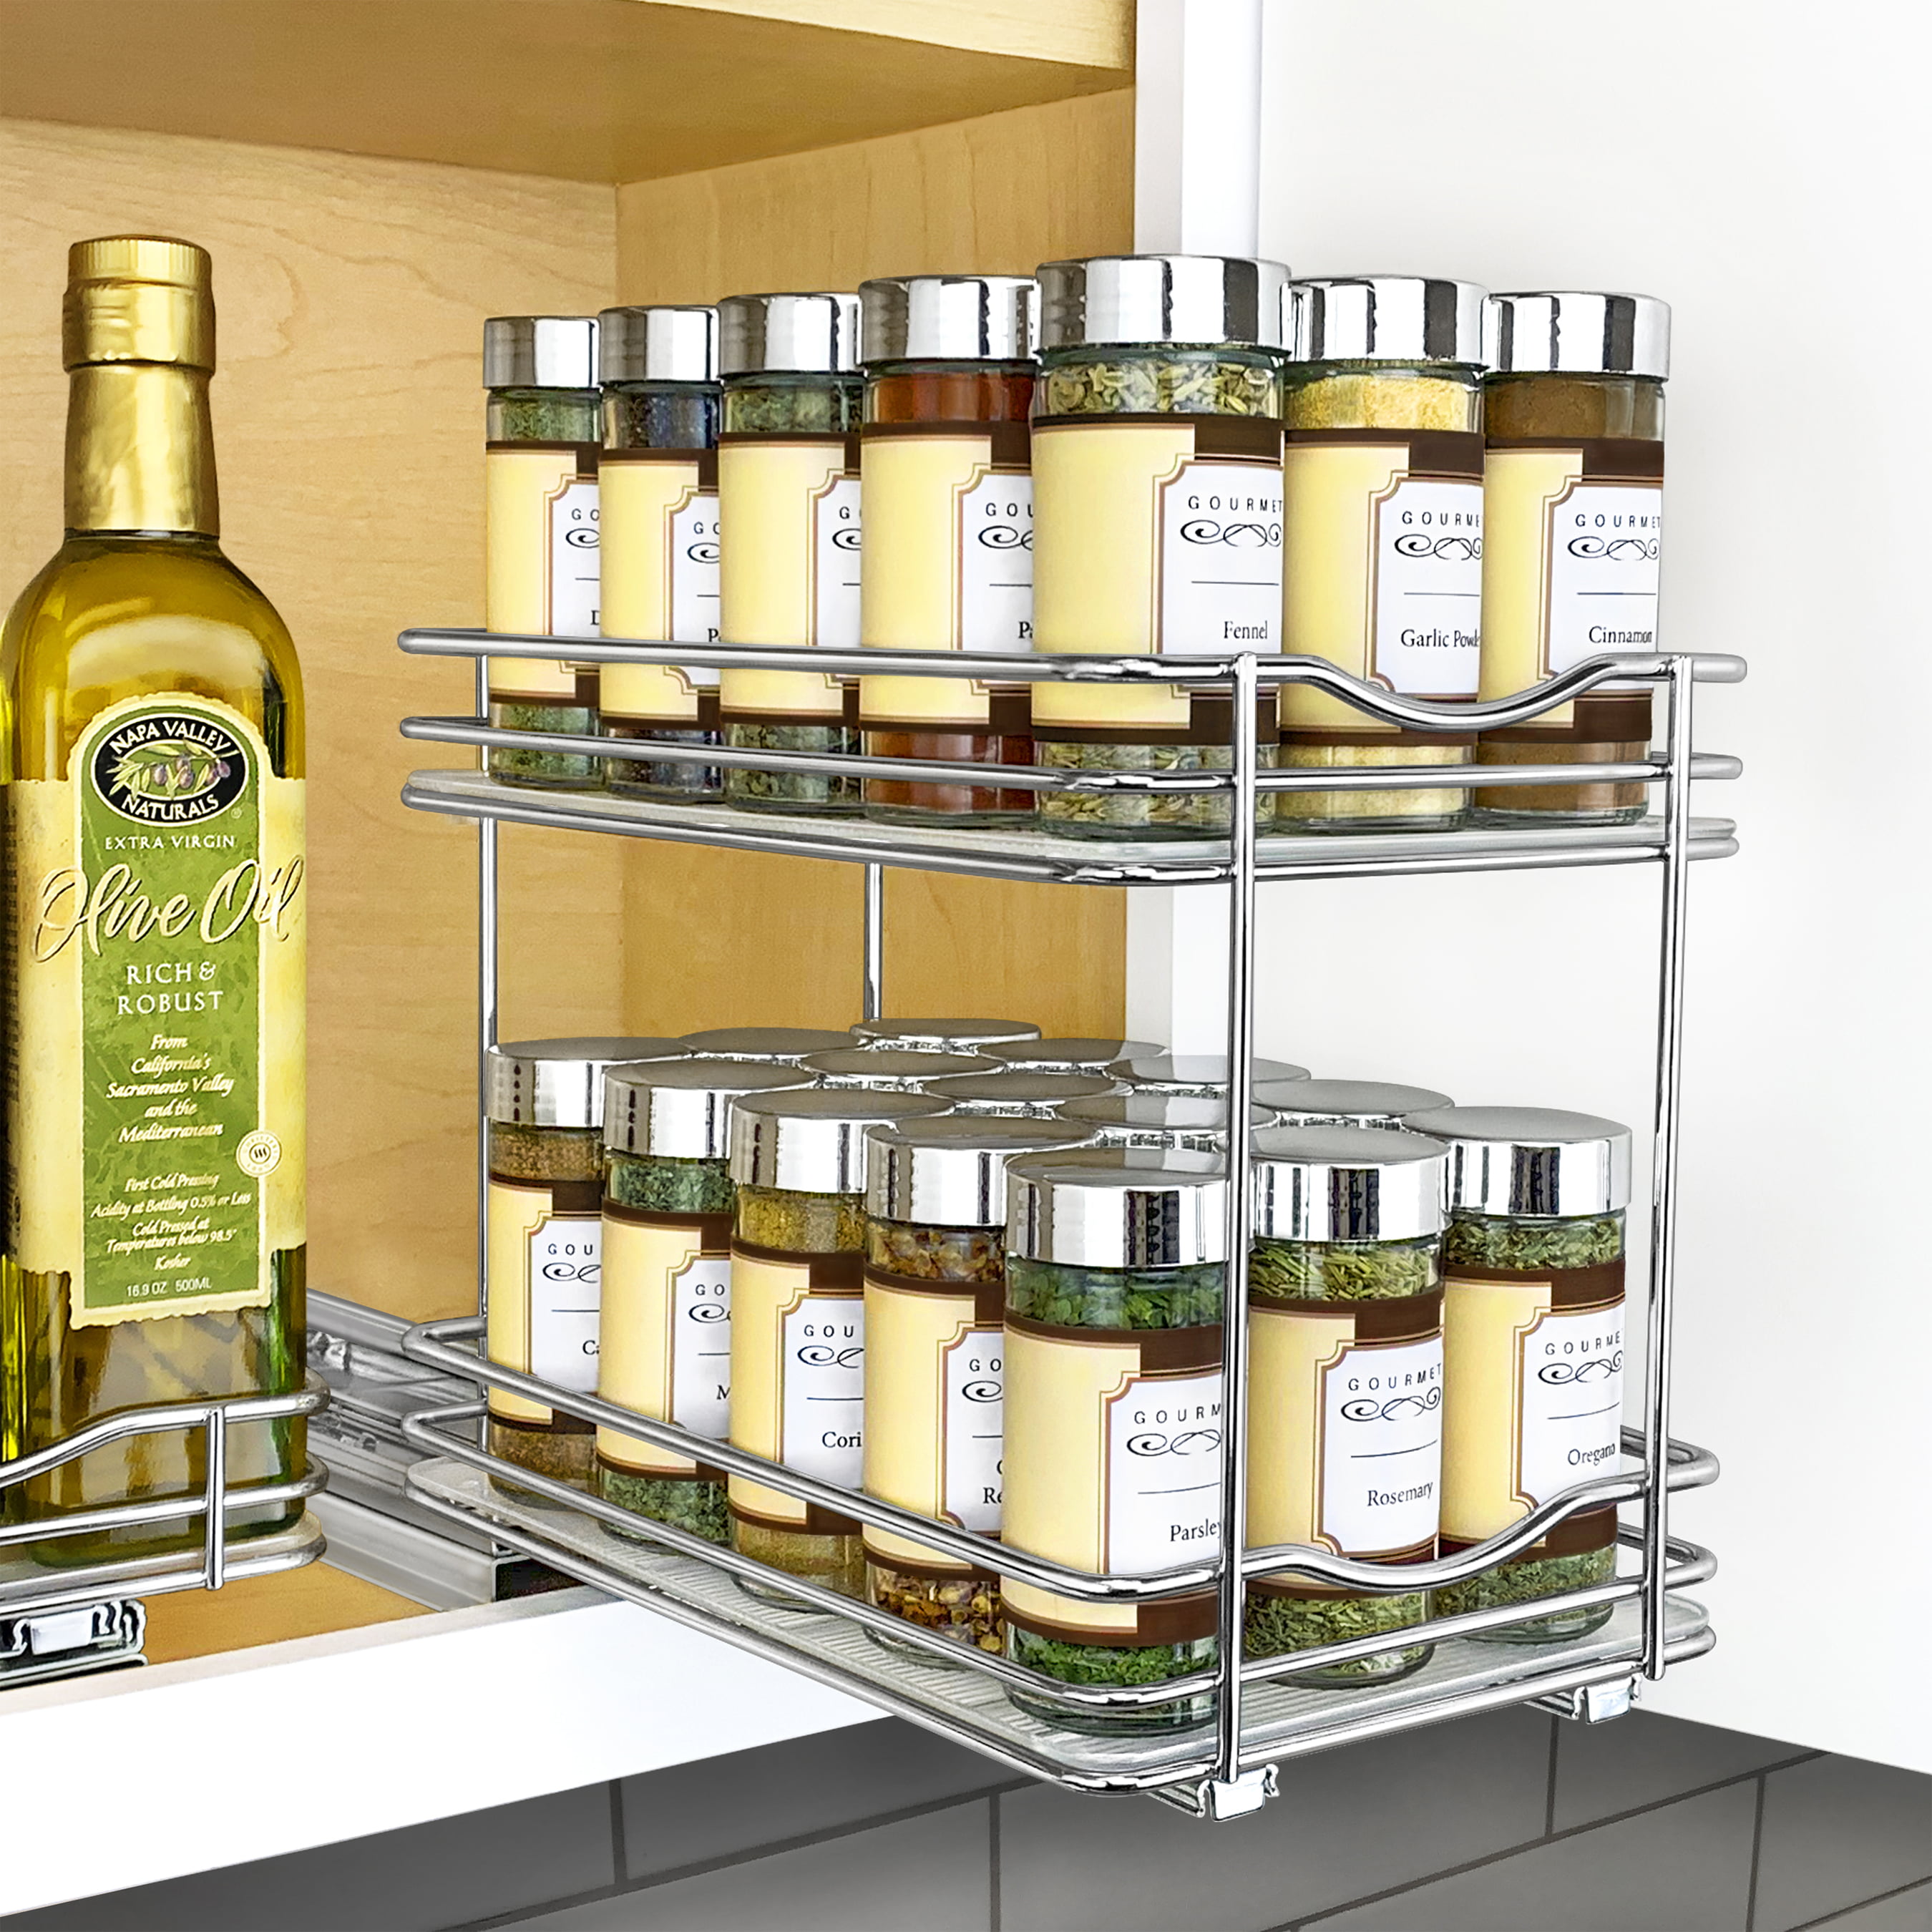 Slide Out Double Spice Rack Upper, Lynk Professional Slide Out Double Spice Rack Upper Cabinet Organizer 6 Wide